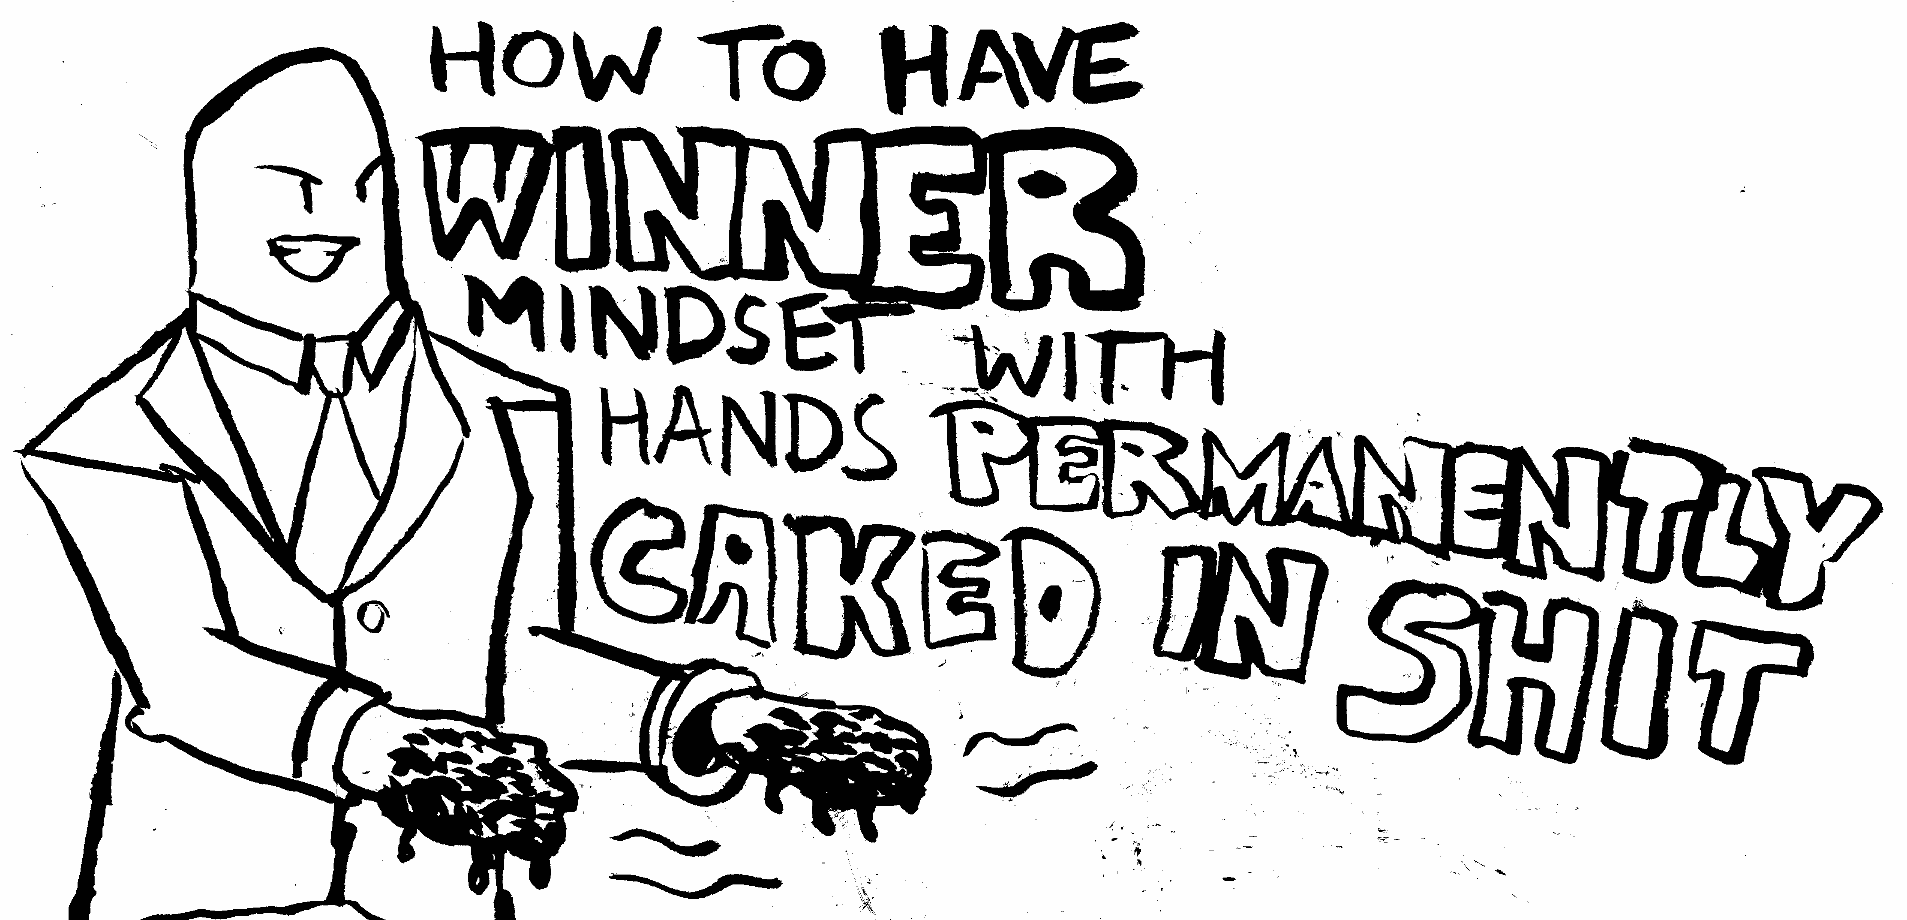 Hands permanently caked in shit self help book parody